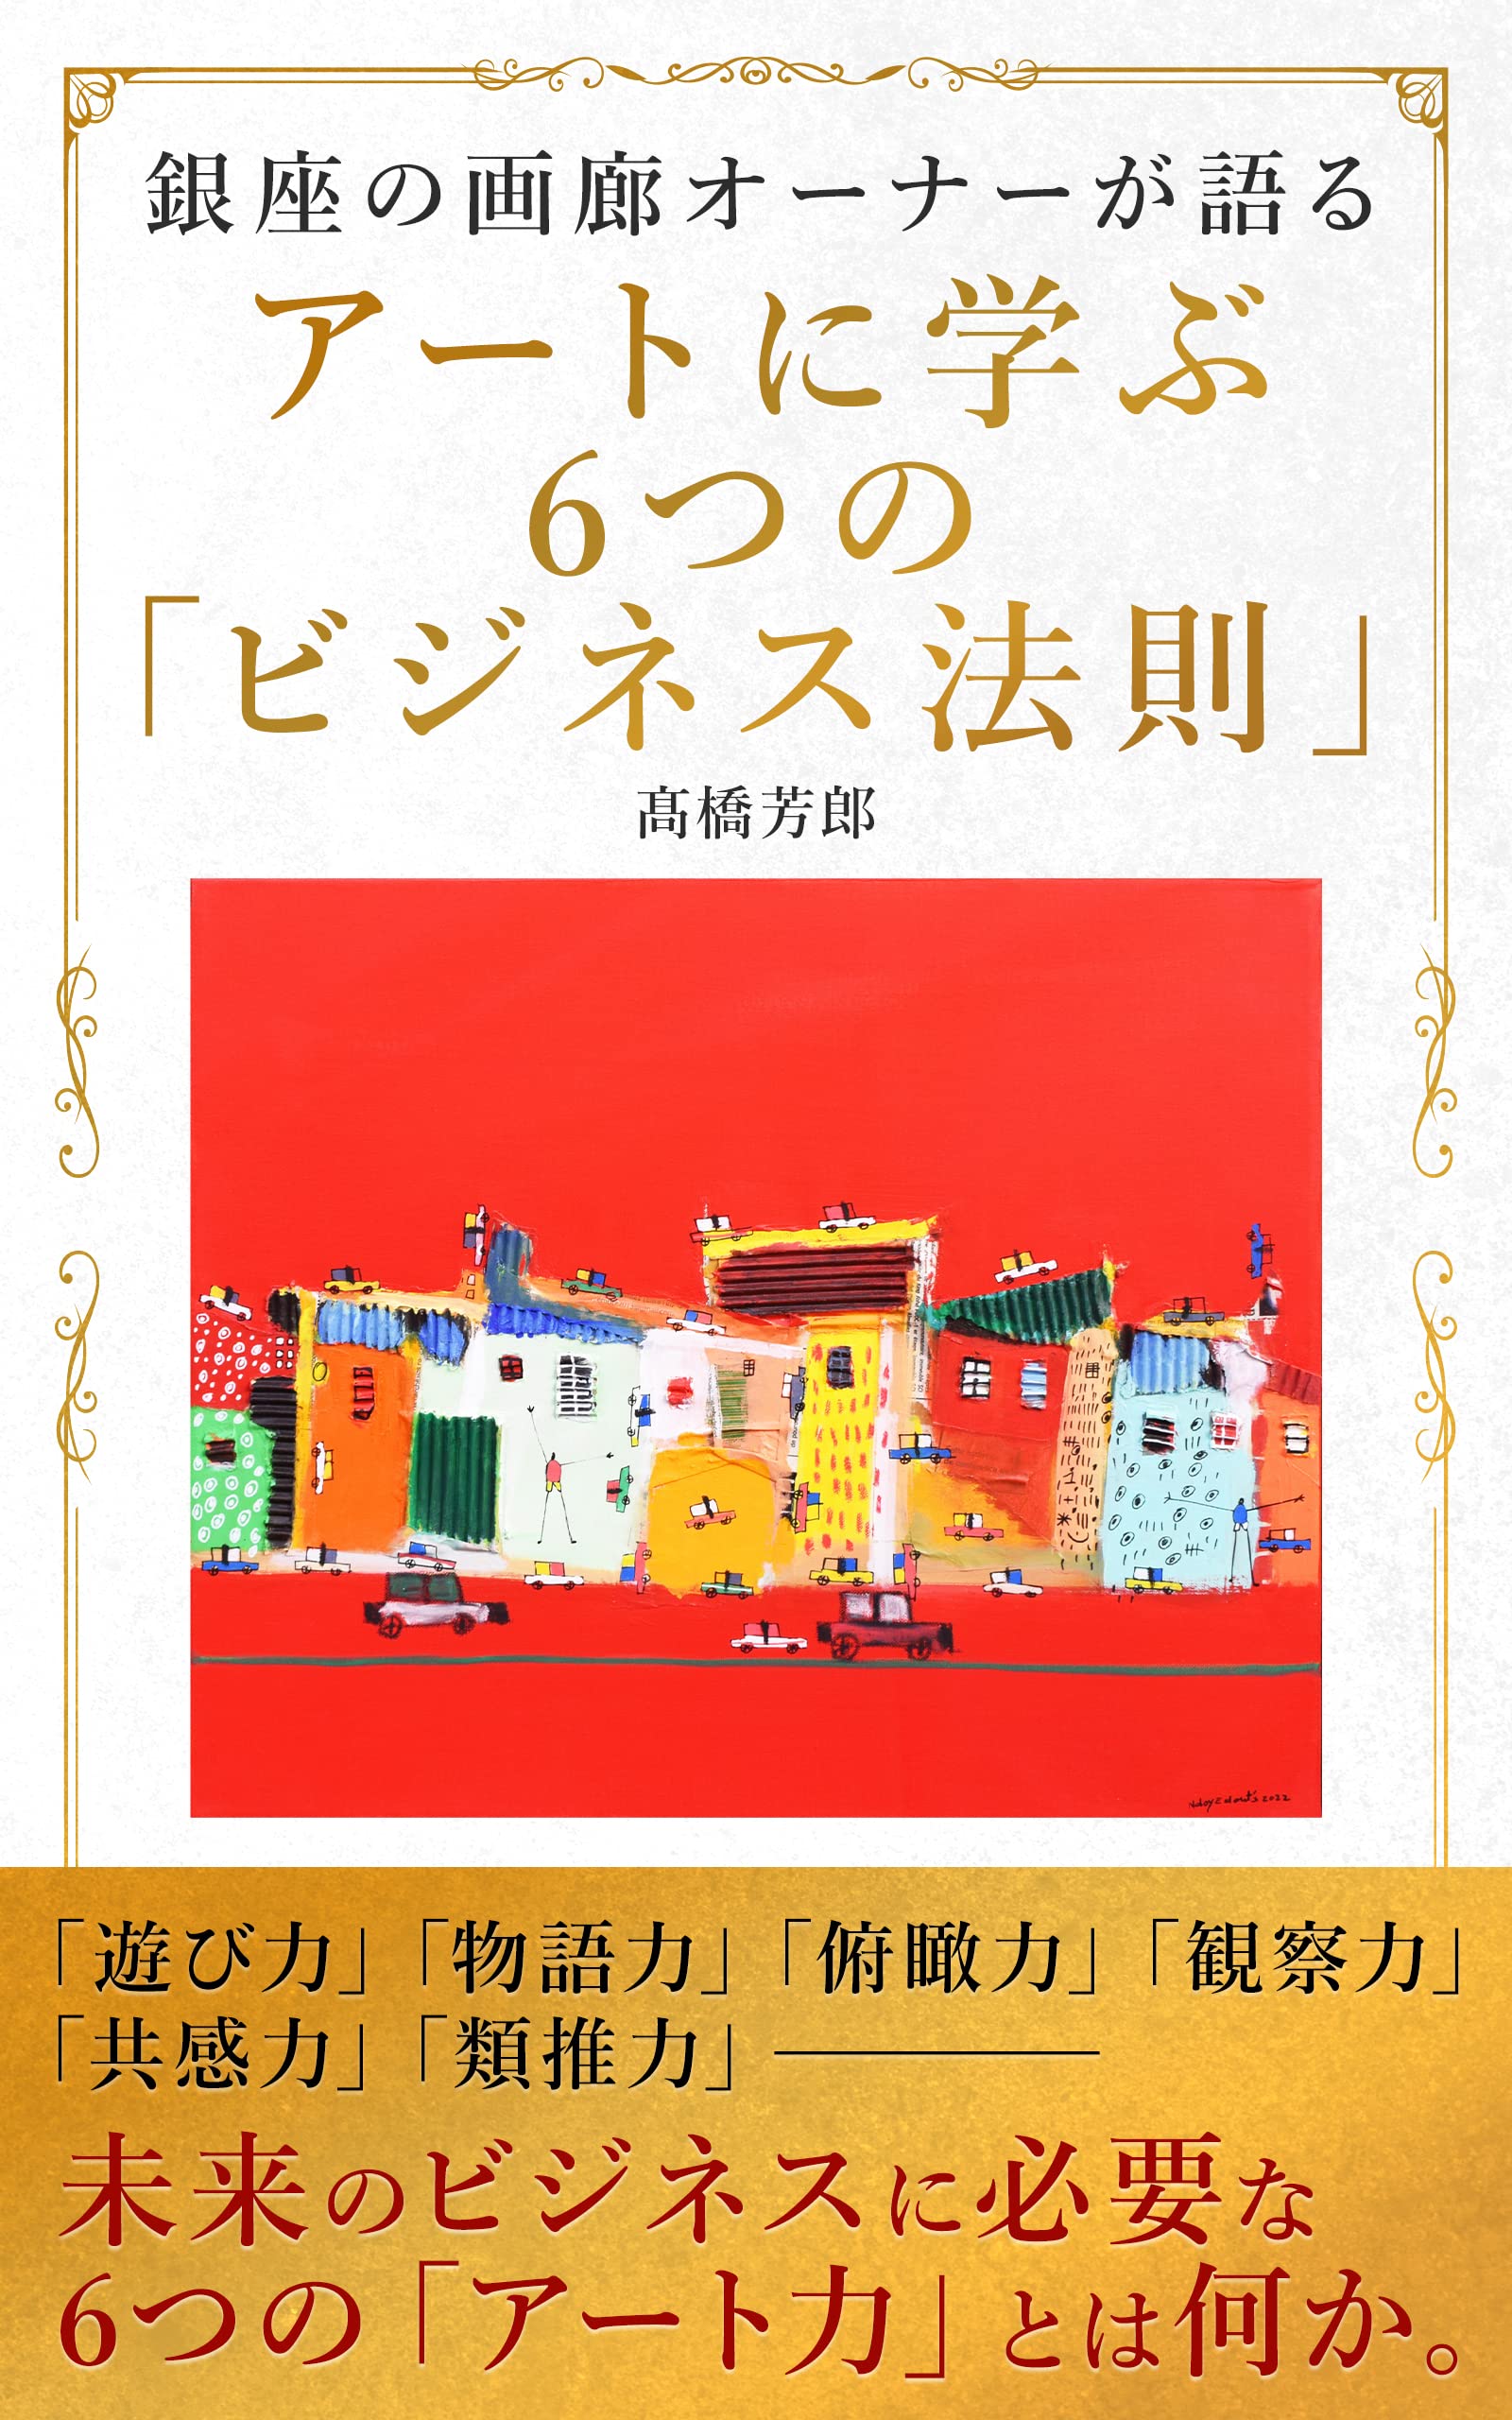 Six Business Laws Learned from Art (Japanese Edition)